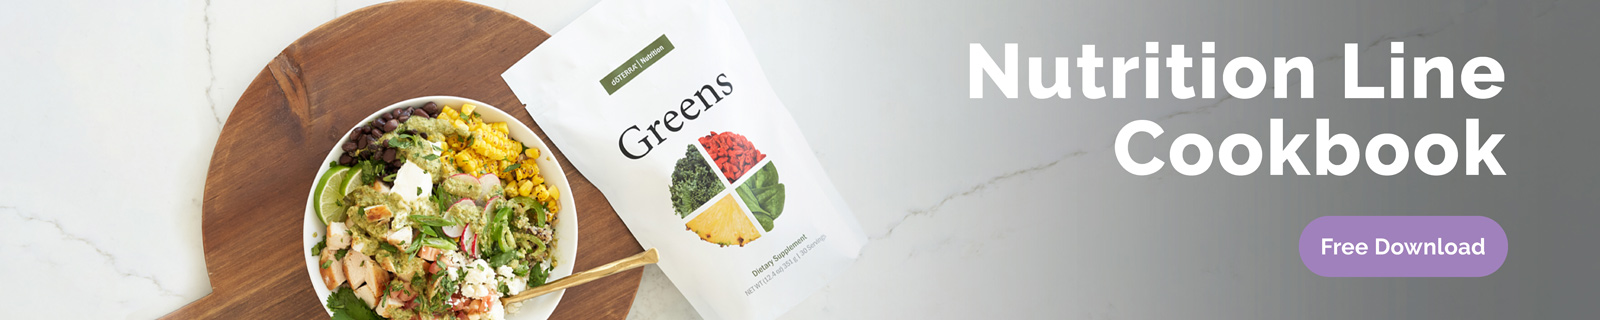 Explore the different ways you can use the doTERRA Nutrition products in this cookbook.